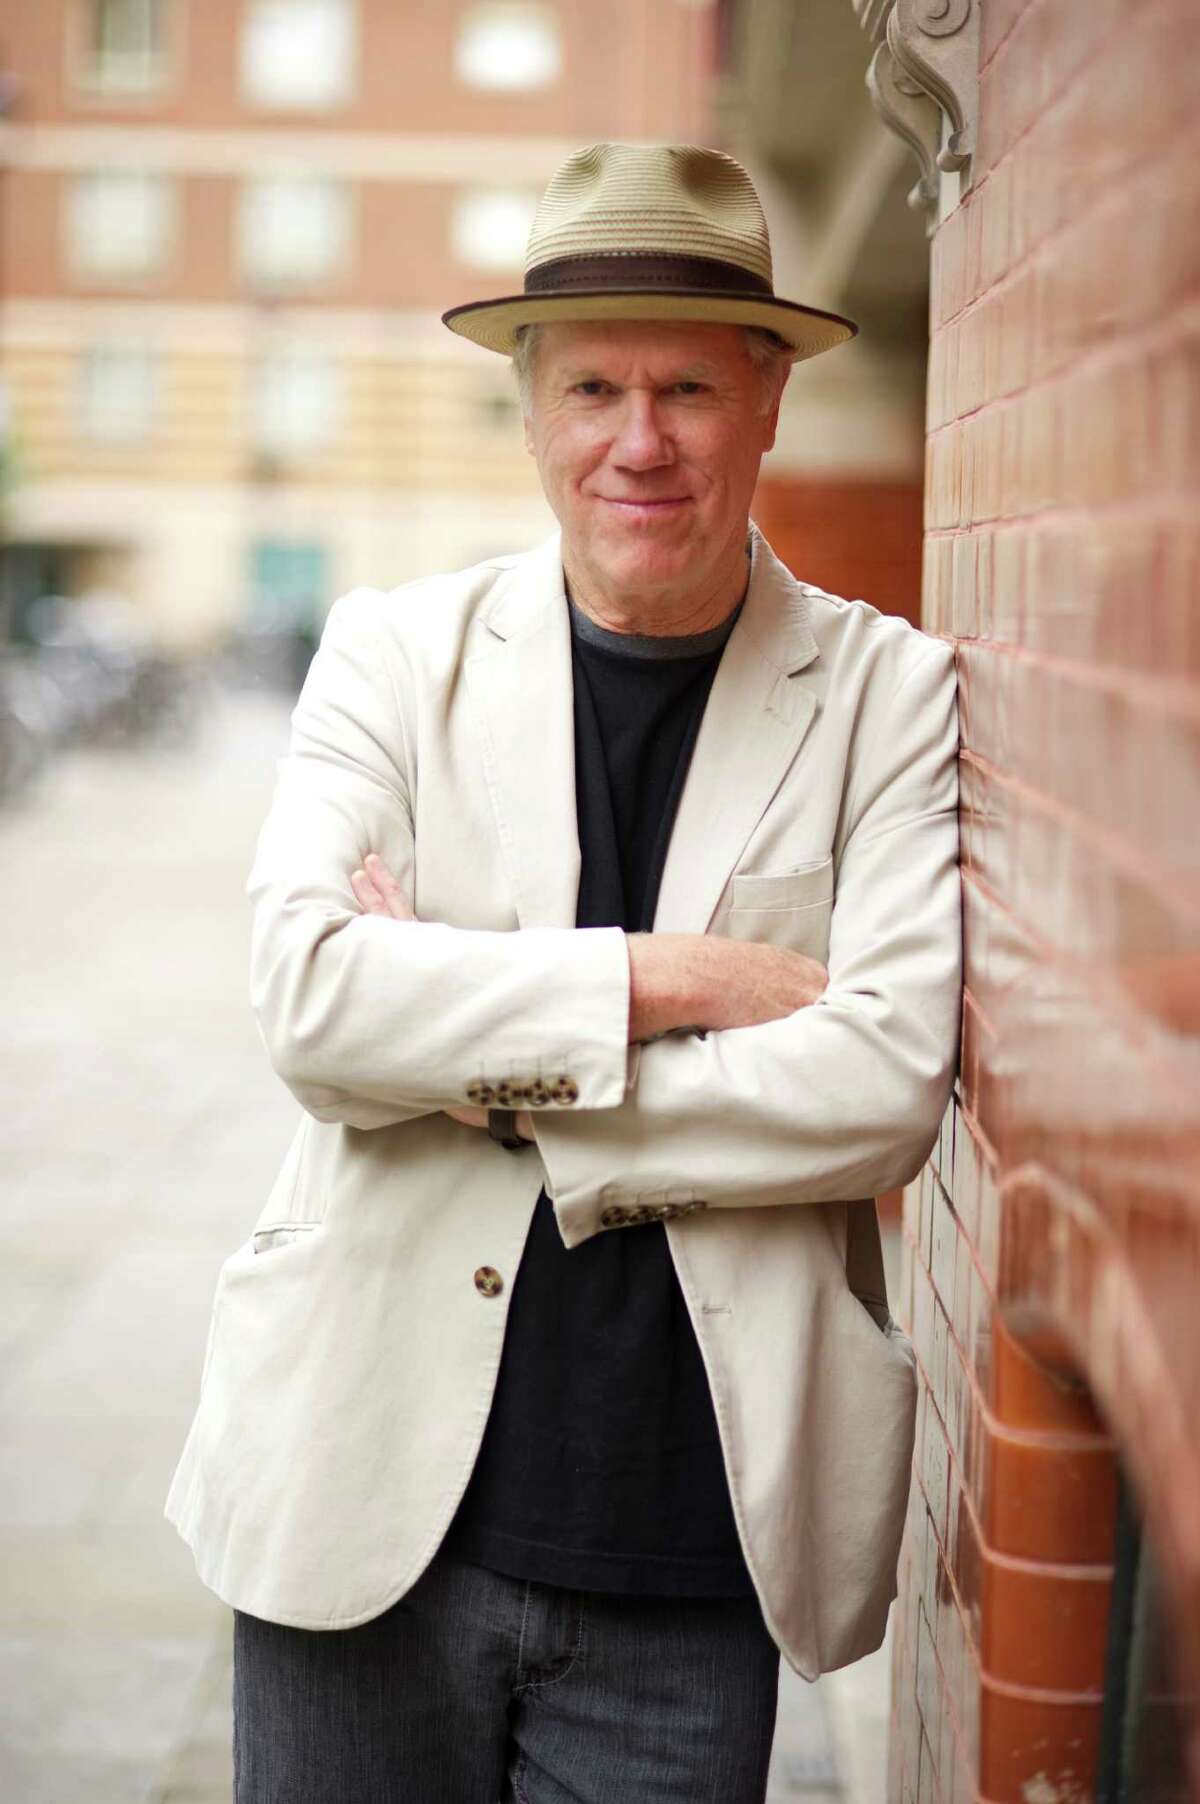 Loudon Wainwright III will perform at StageOne at the Fairfield Theatre Company Saturday night, May 12.